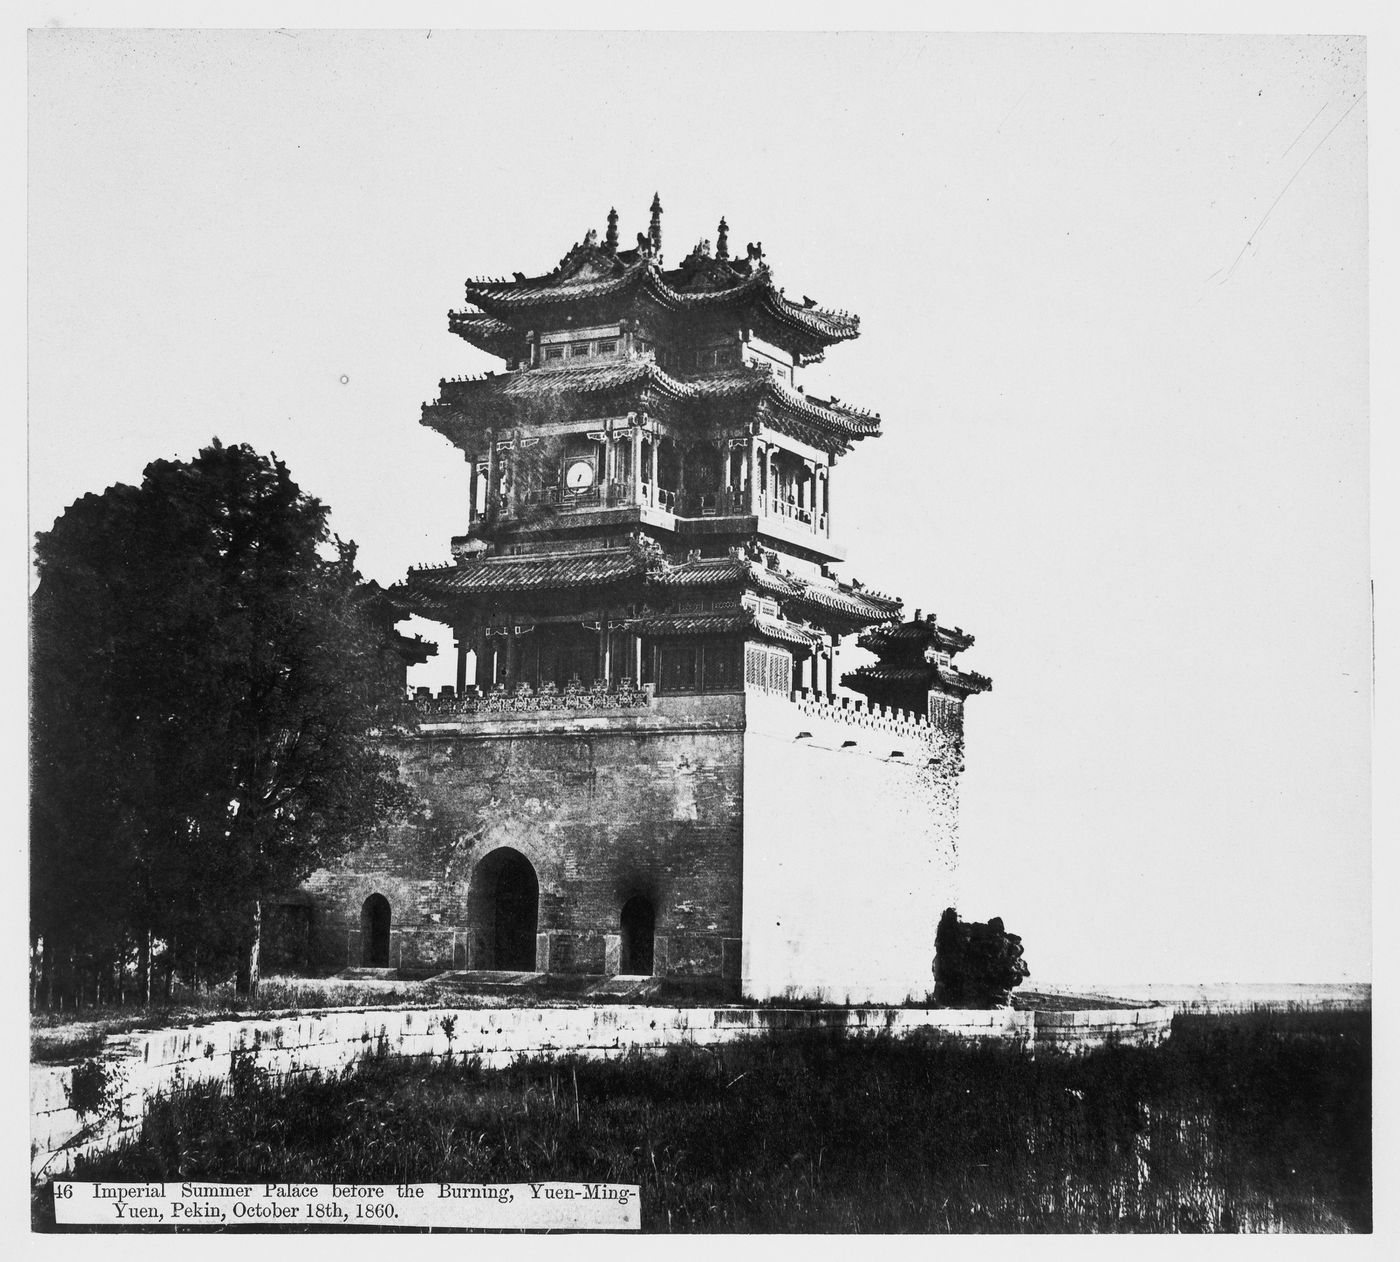 View of the Belvedere of the God of Literature [Wen Chang Di Jun Ge] (now known as the Studio of Literary Prosperity or Wen Chang Ge), Garden of the Clear Ripples [Qing Yi Yuan] (now known as the Summer Palace or Yihe Yuan), Peking (now Beijing), China